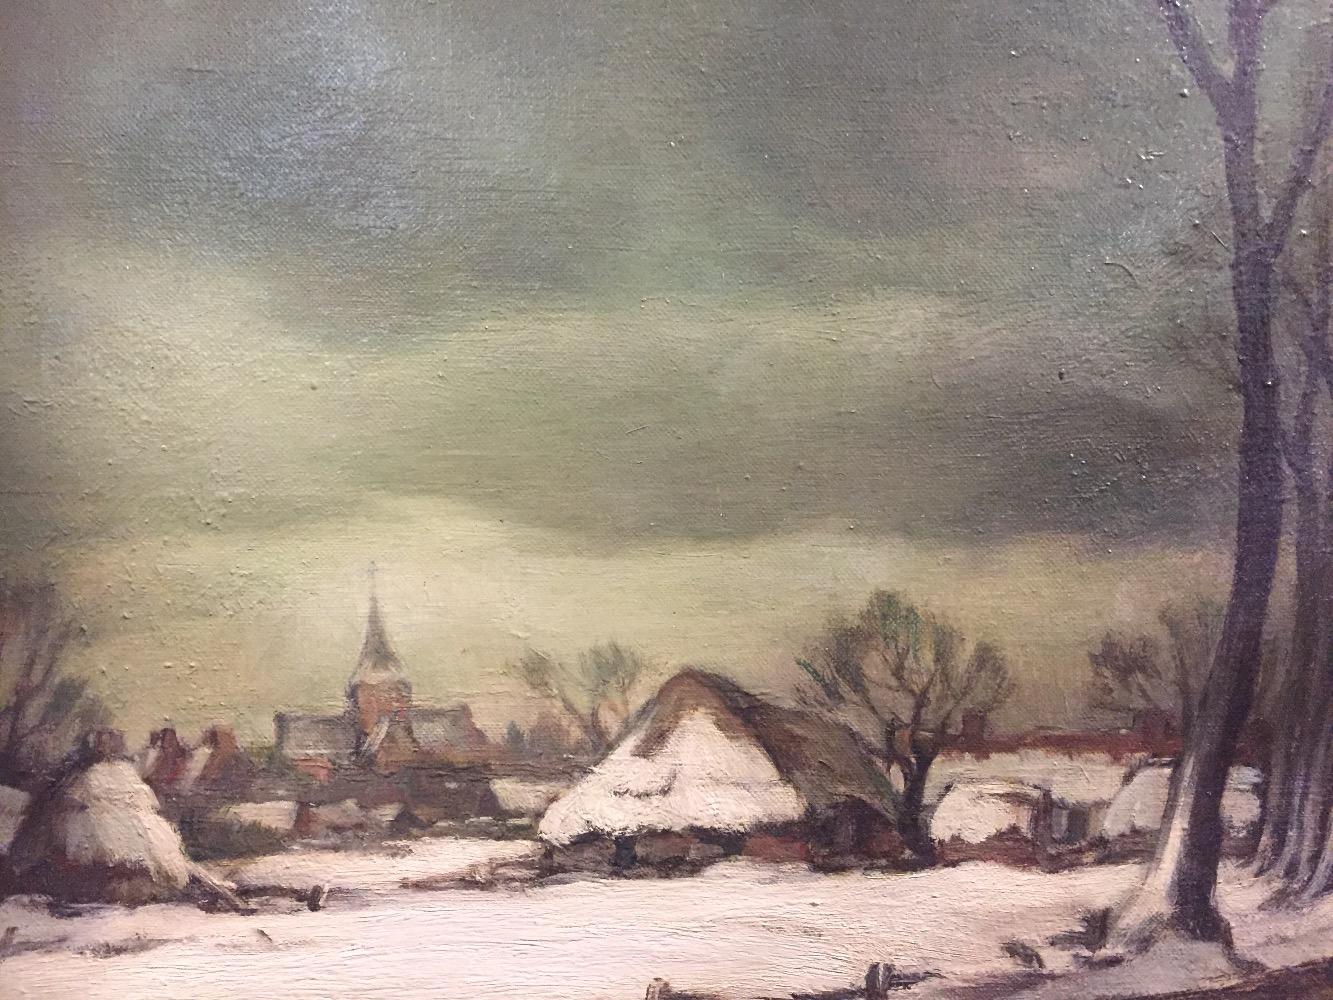 The little village in the snow 